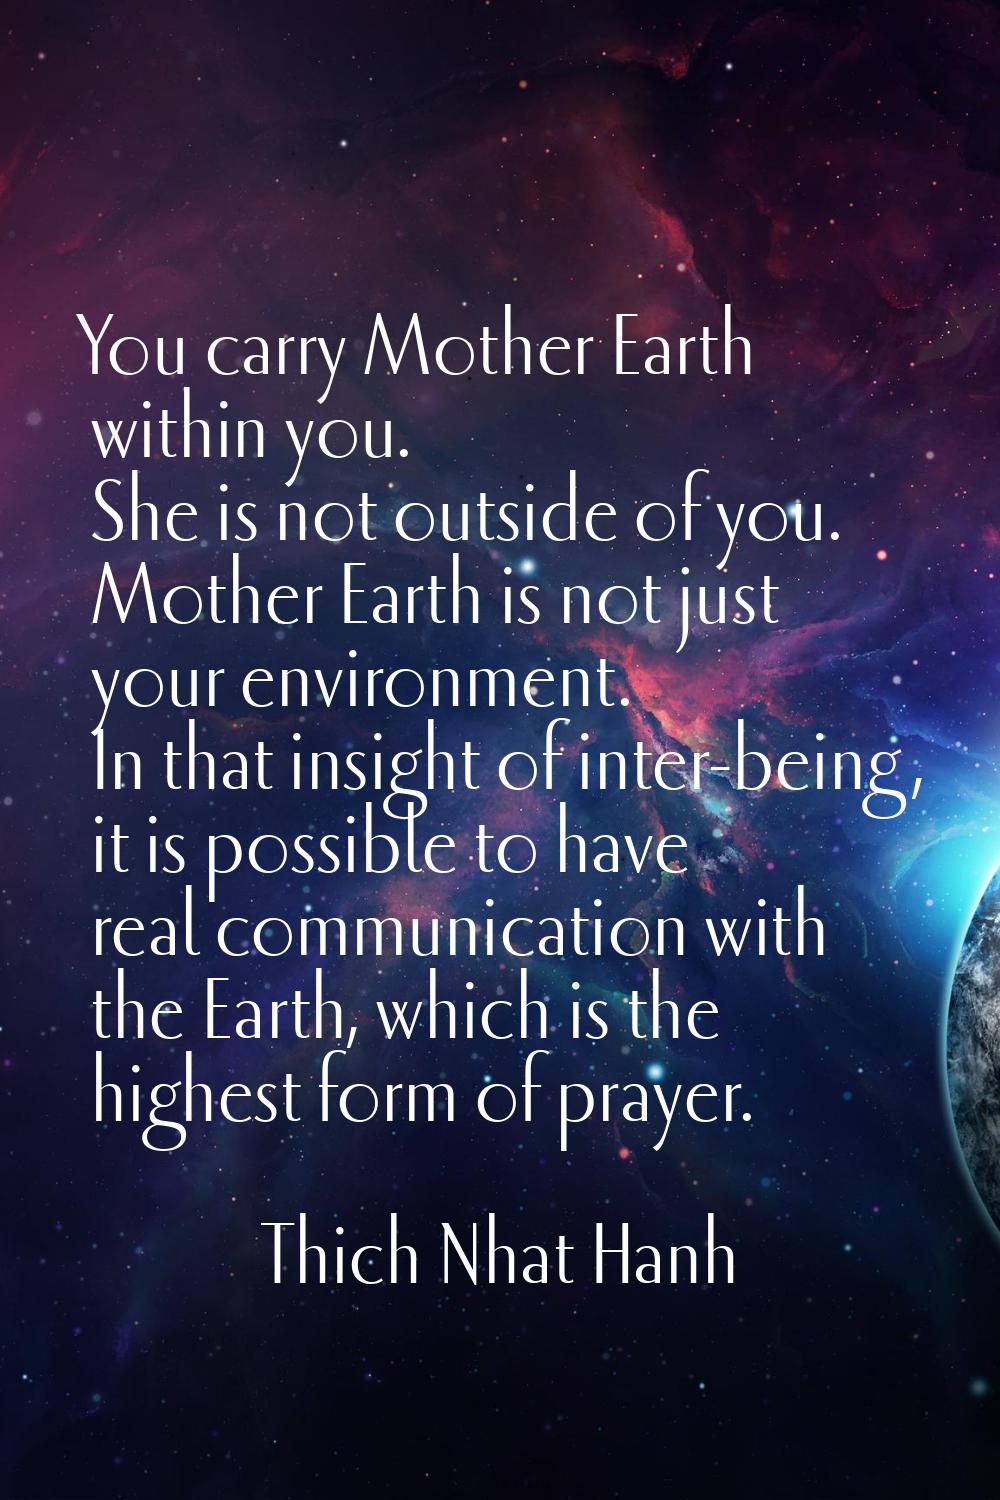 You carry Mother Earth within you. She is not outside of you. Mother Earth is not just your environ